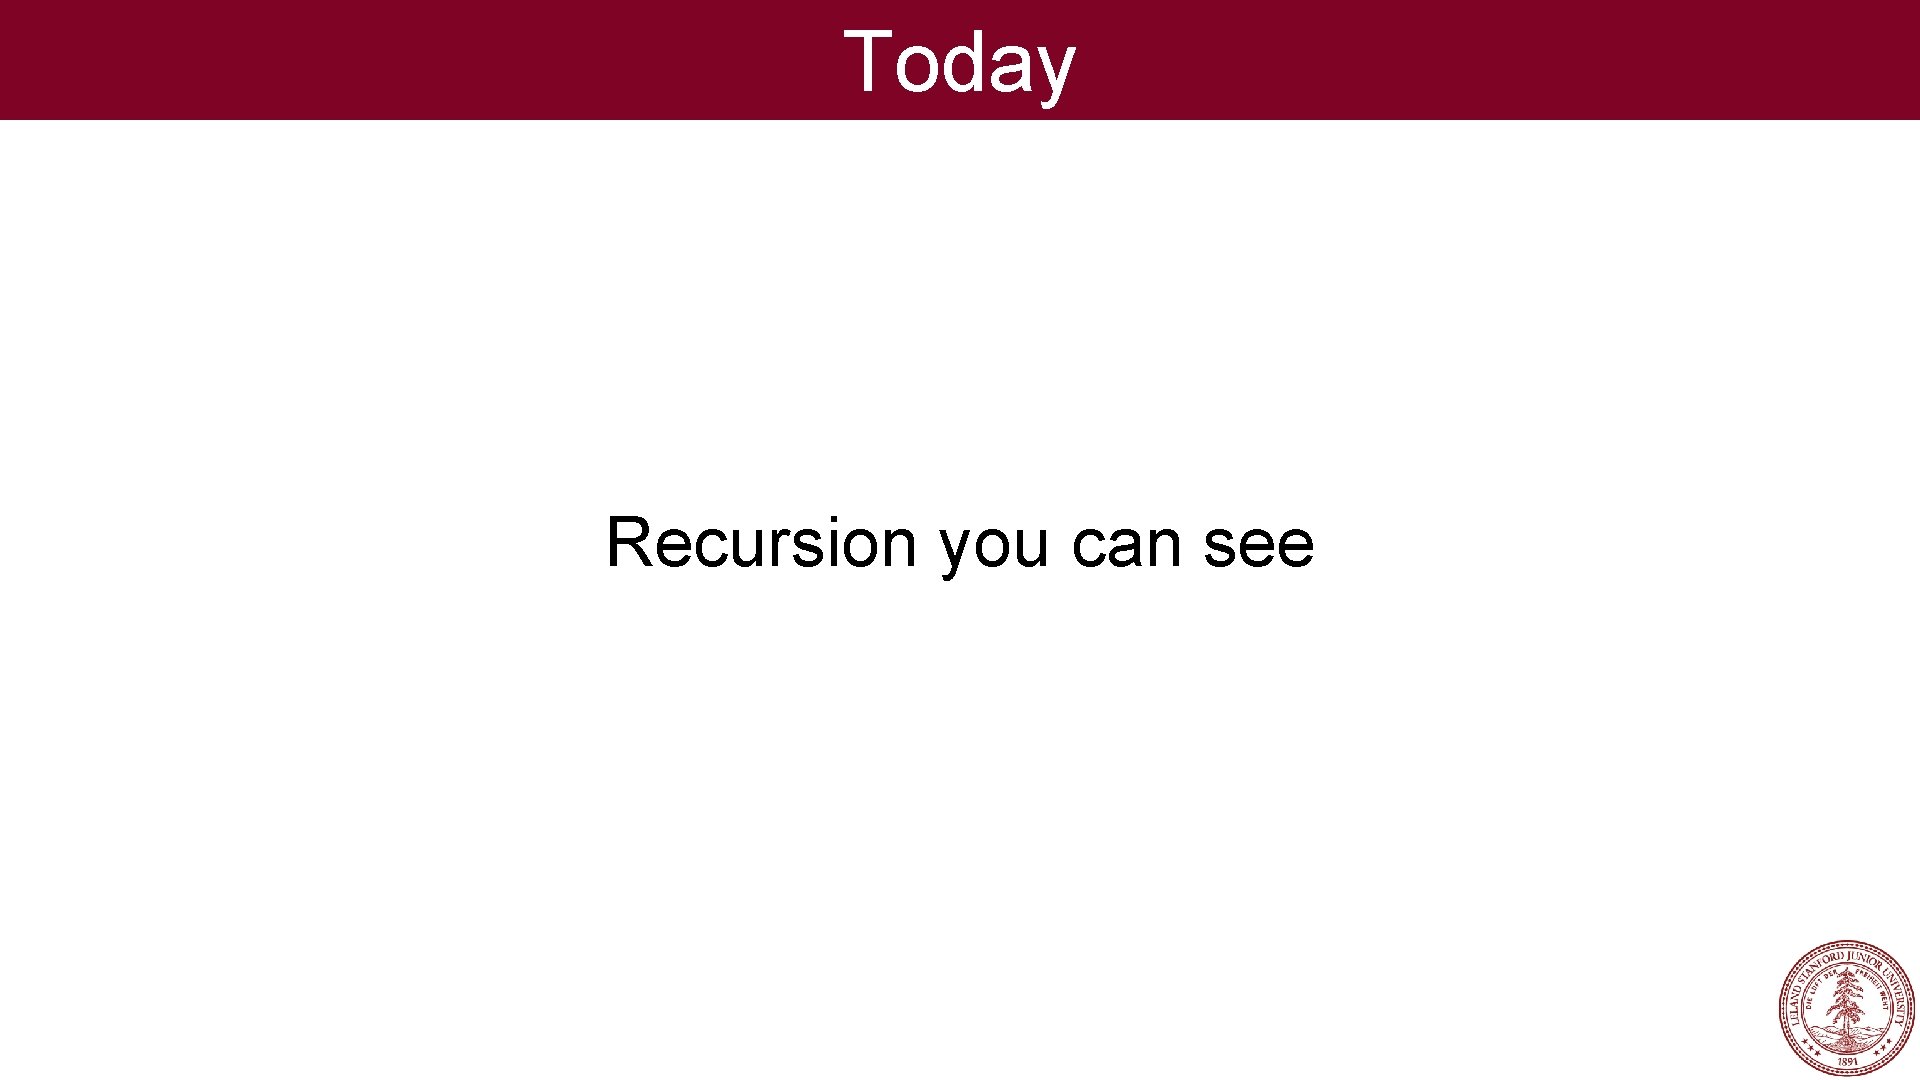 Today Recursion you can see 